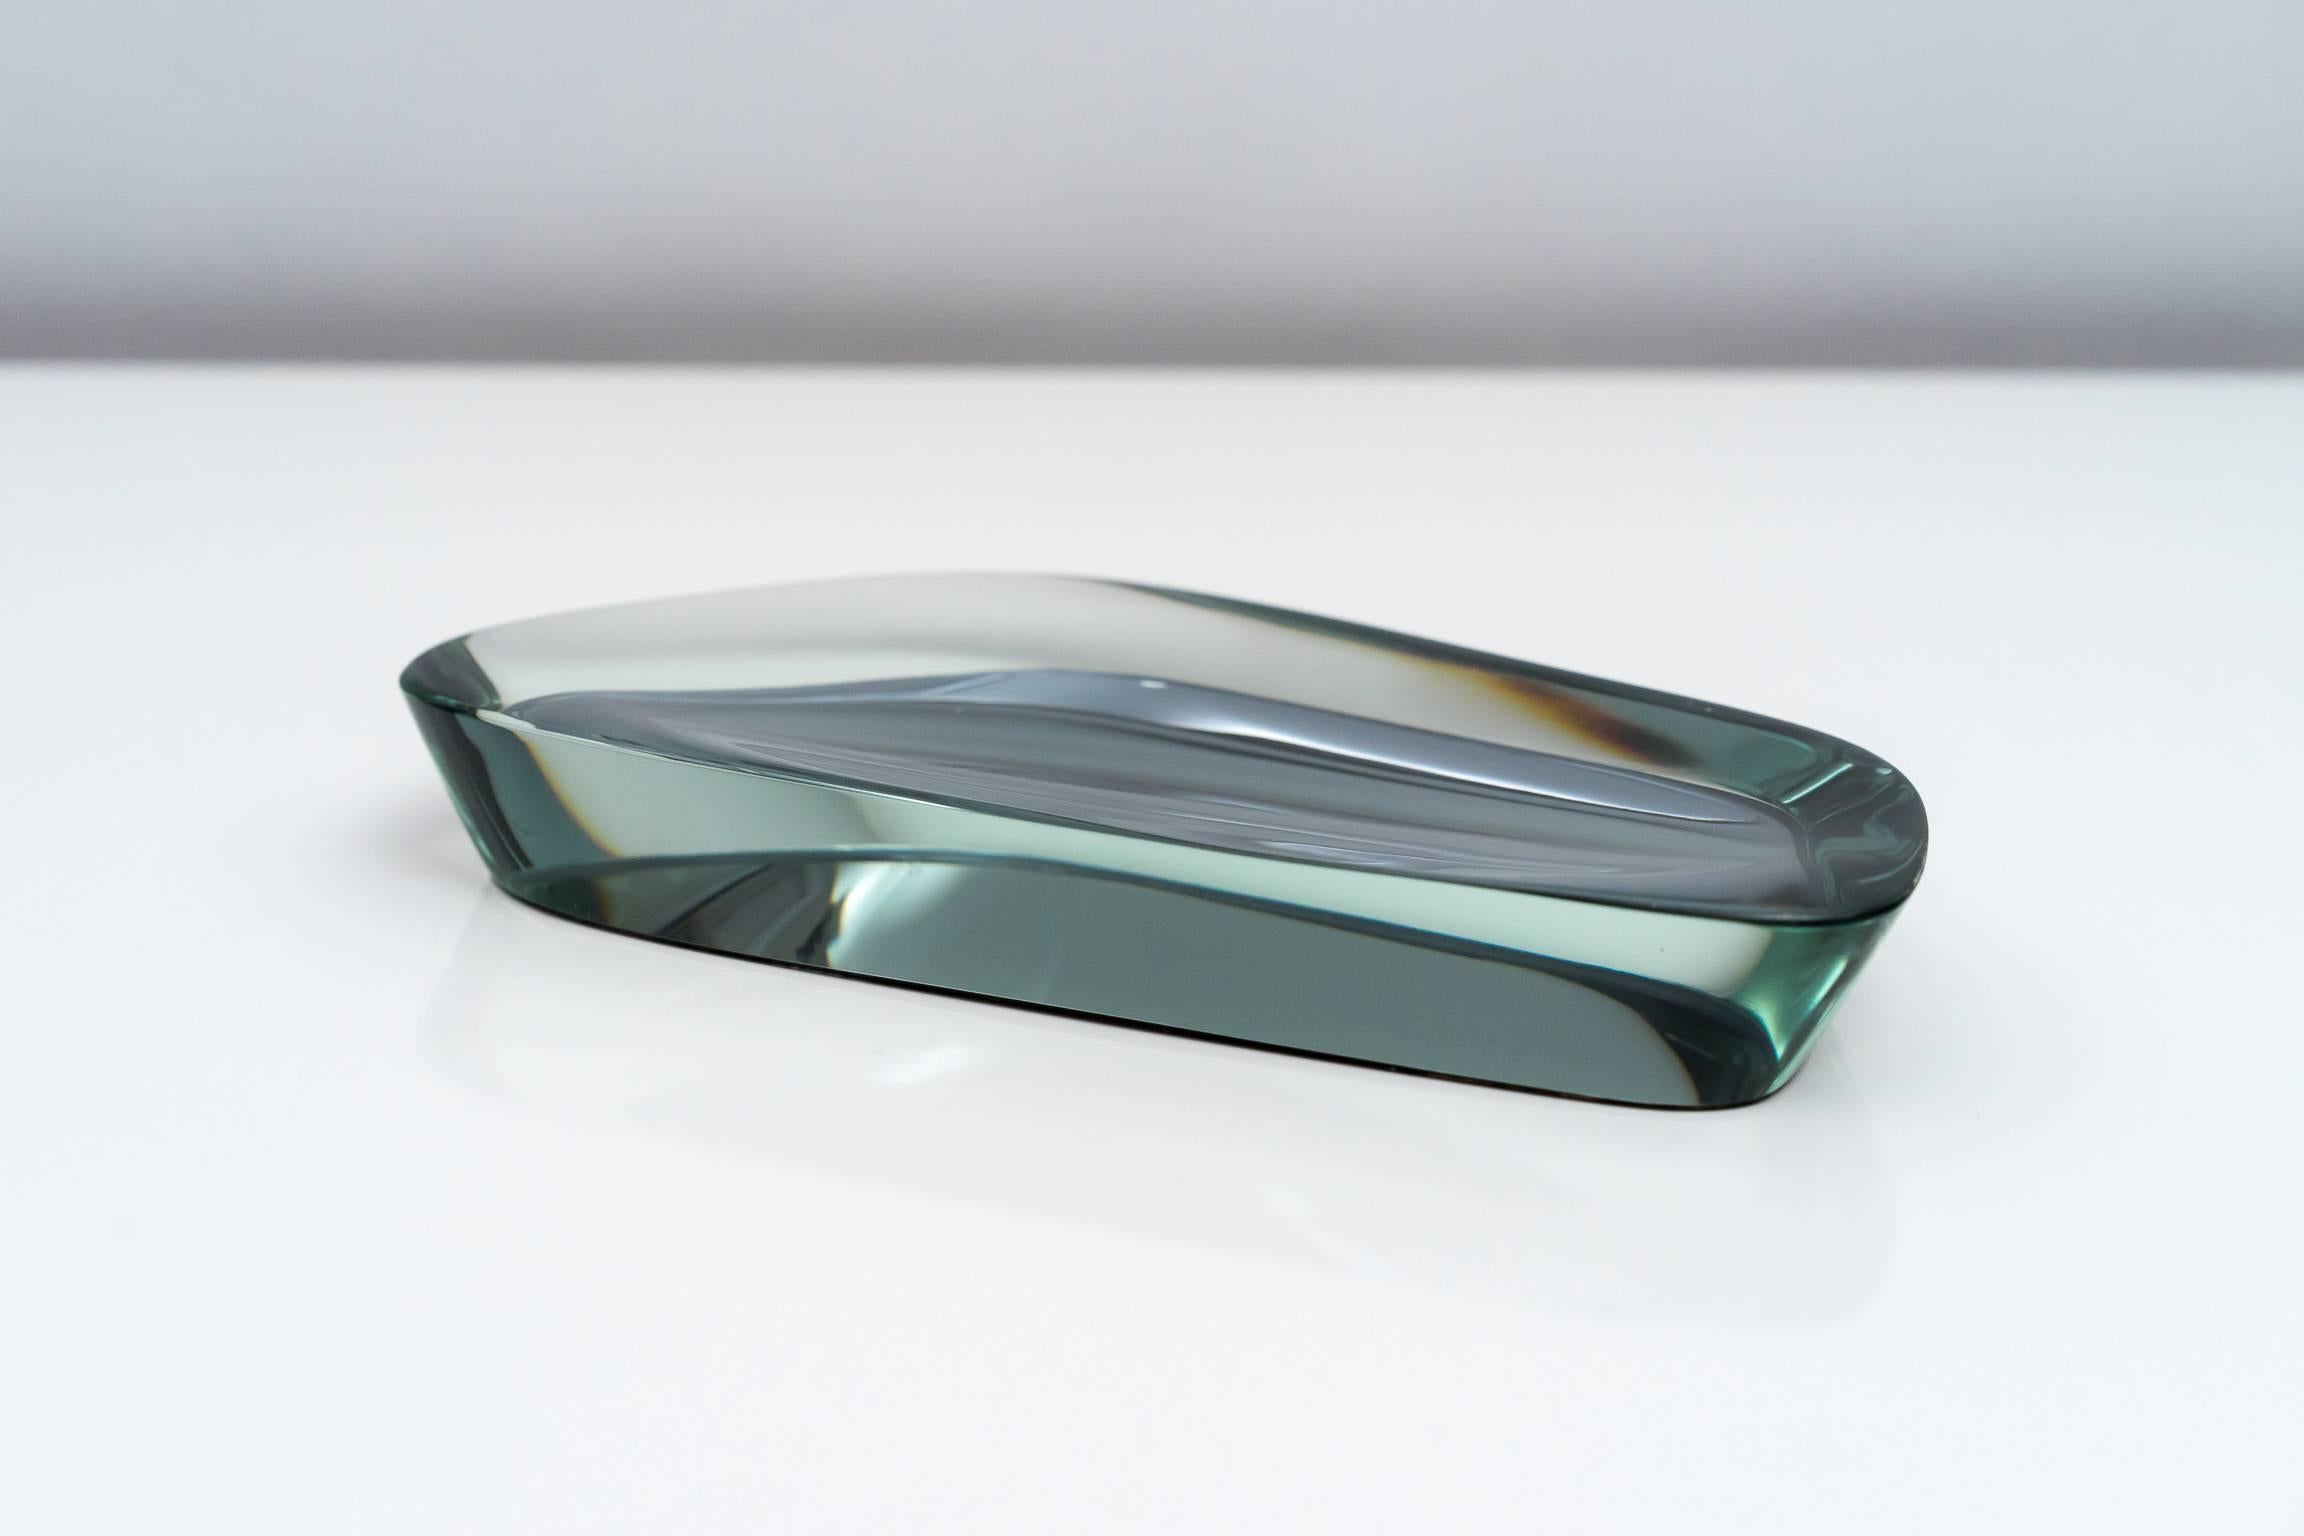 Fontana Arte Cut and Polished Mirrored Glass Abstract Dish, 1950s (Moderne)